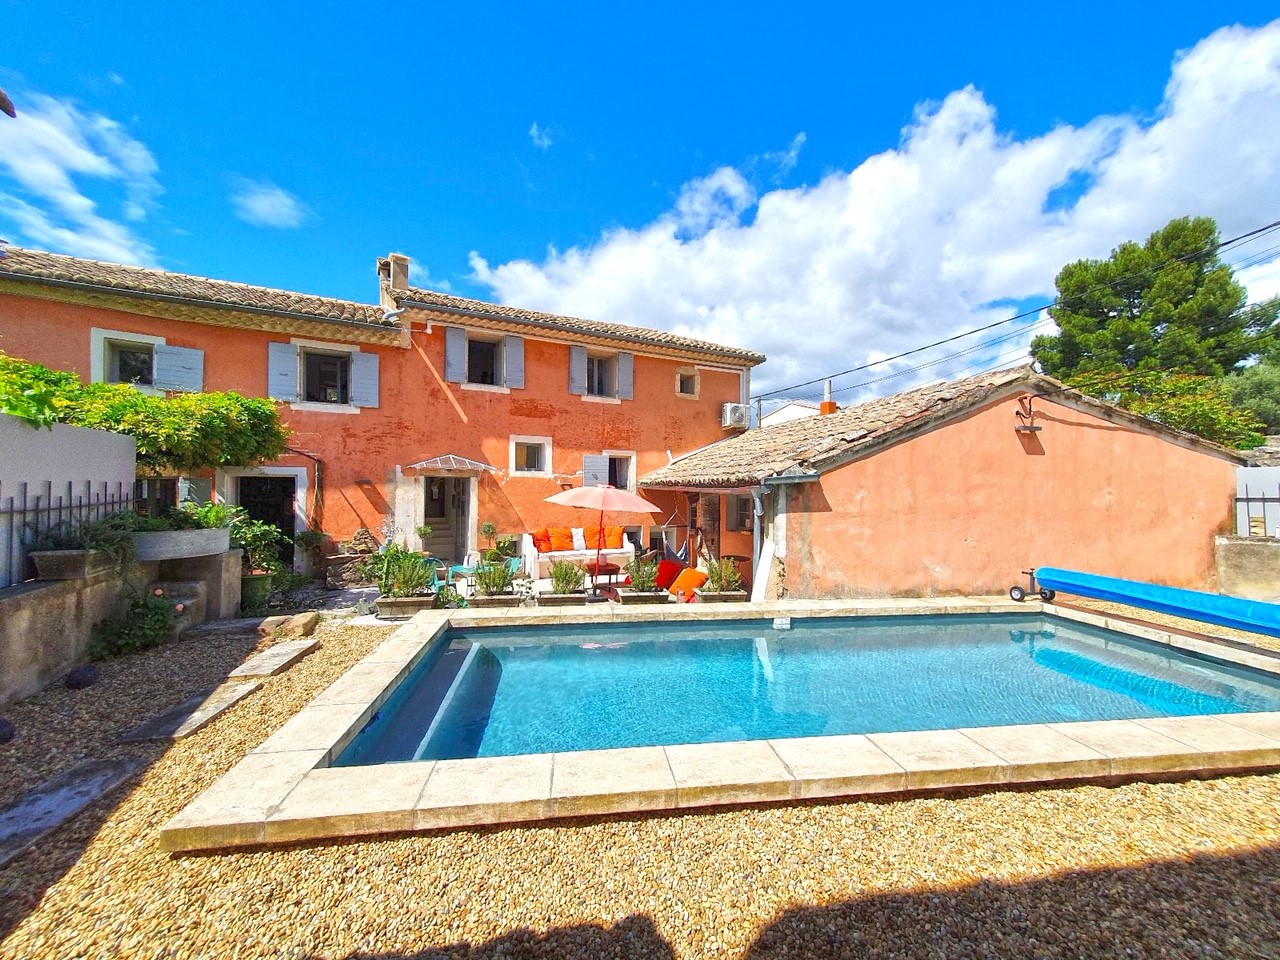 at the foothills of Luberon, charming 3 bedroom house with swimming pool